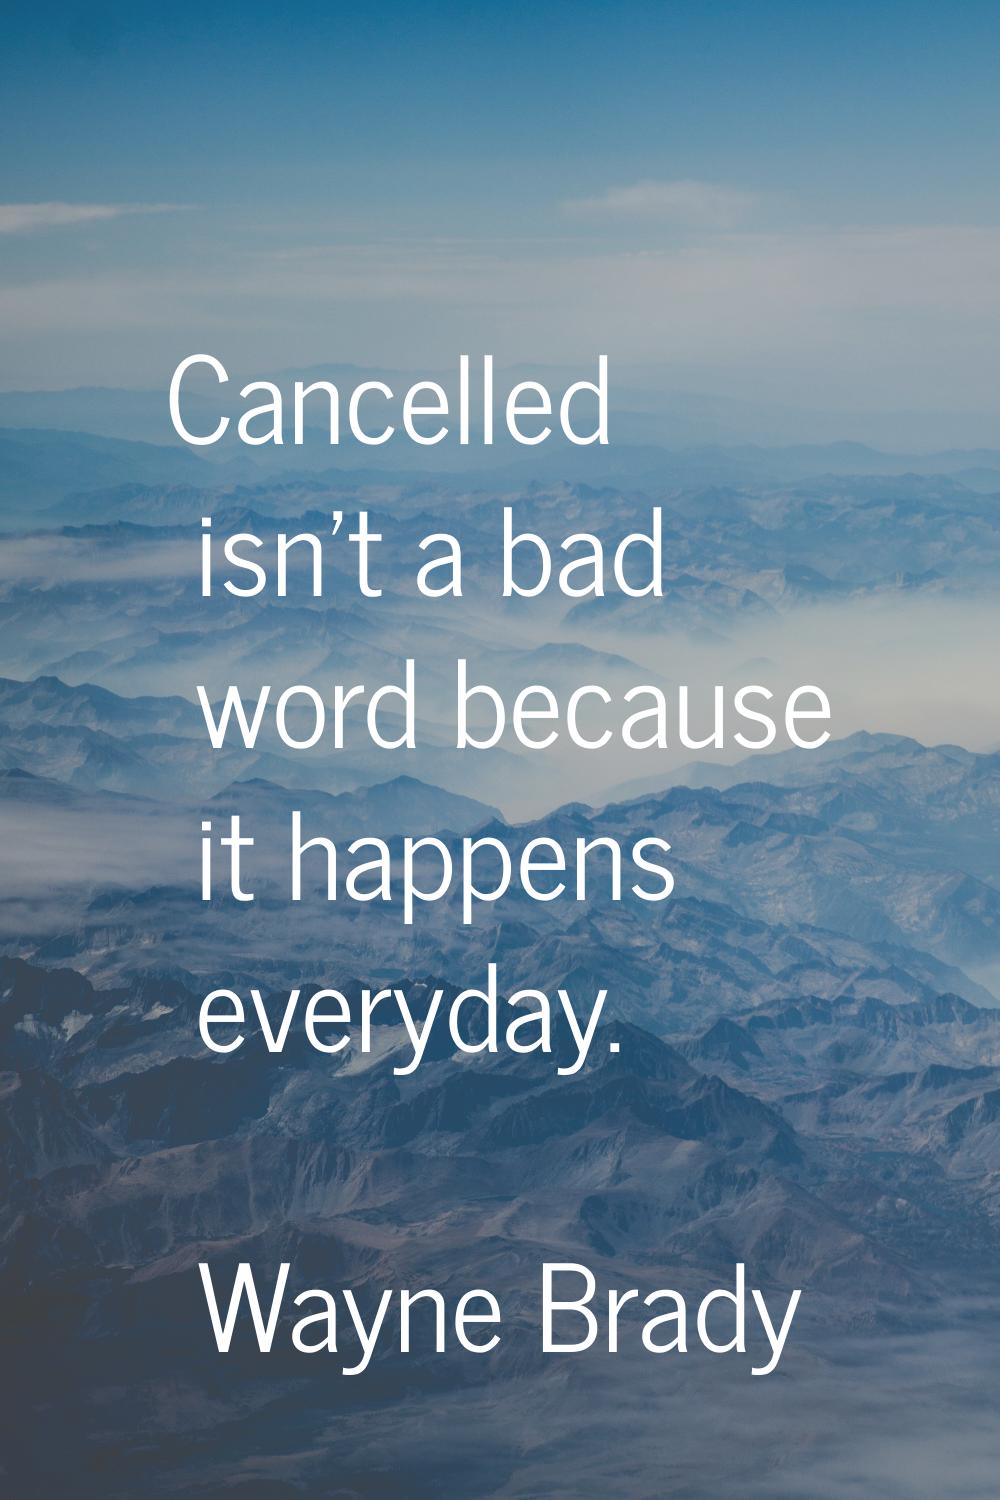 Cancelled isn't a bad word because it happens everyday.